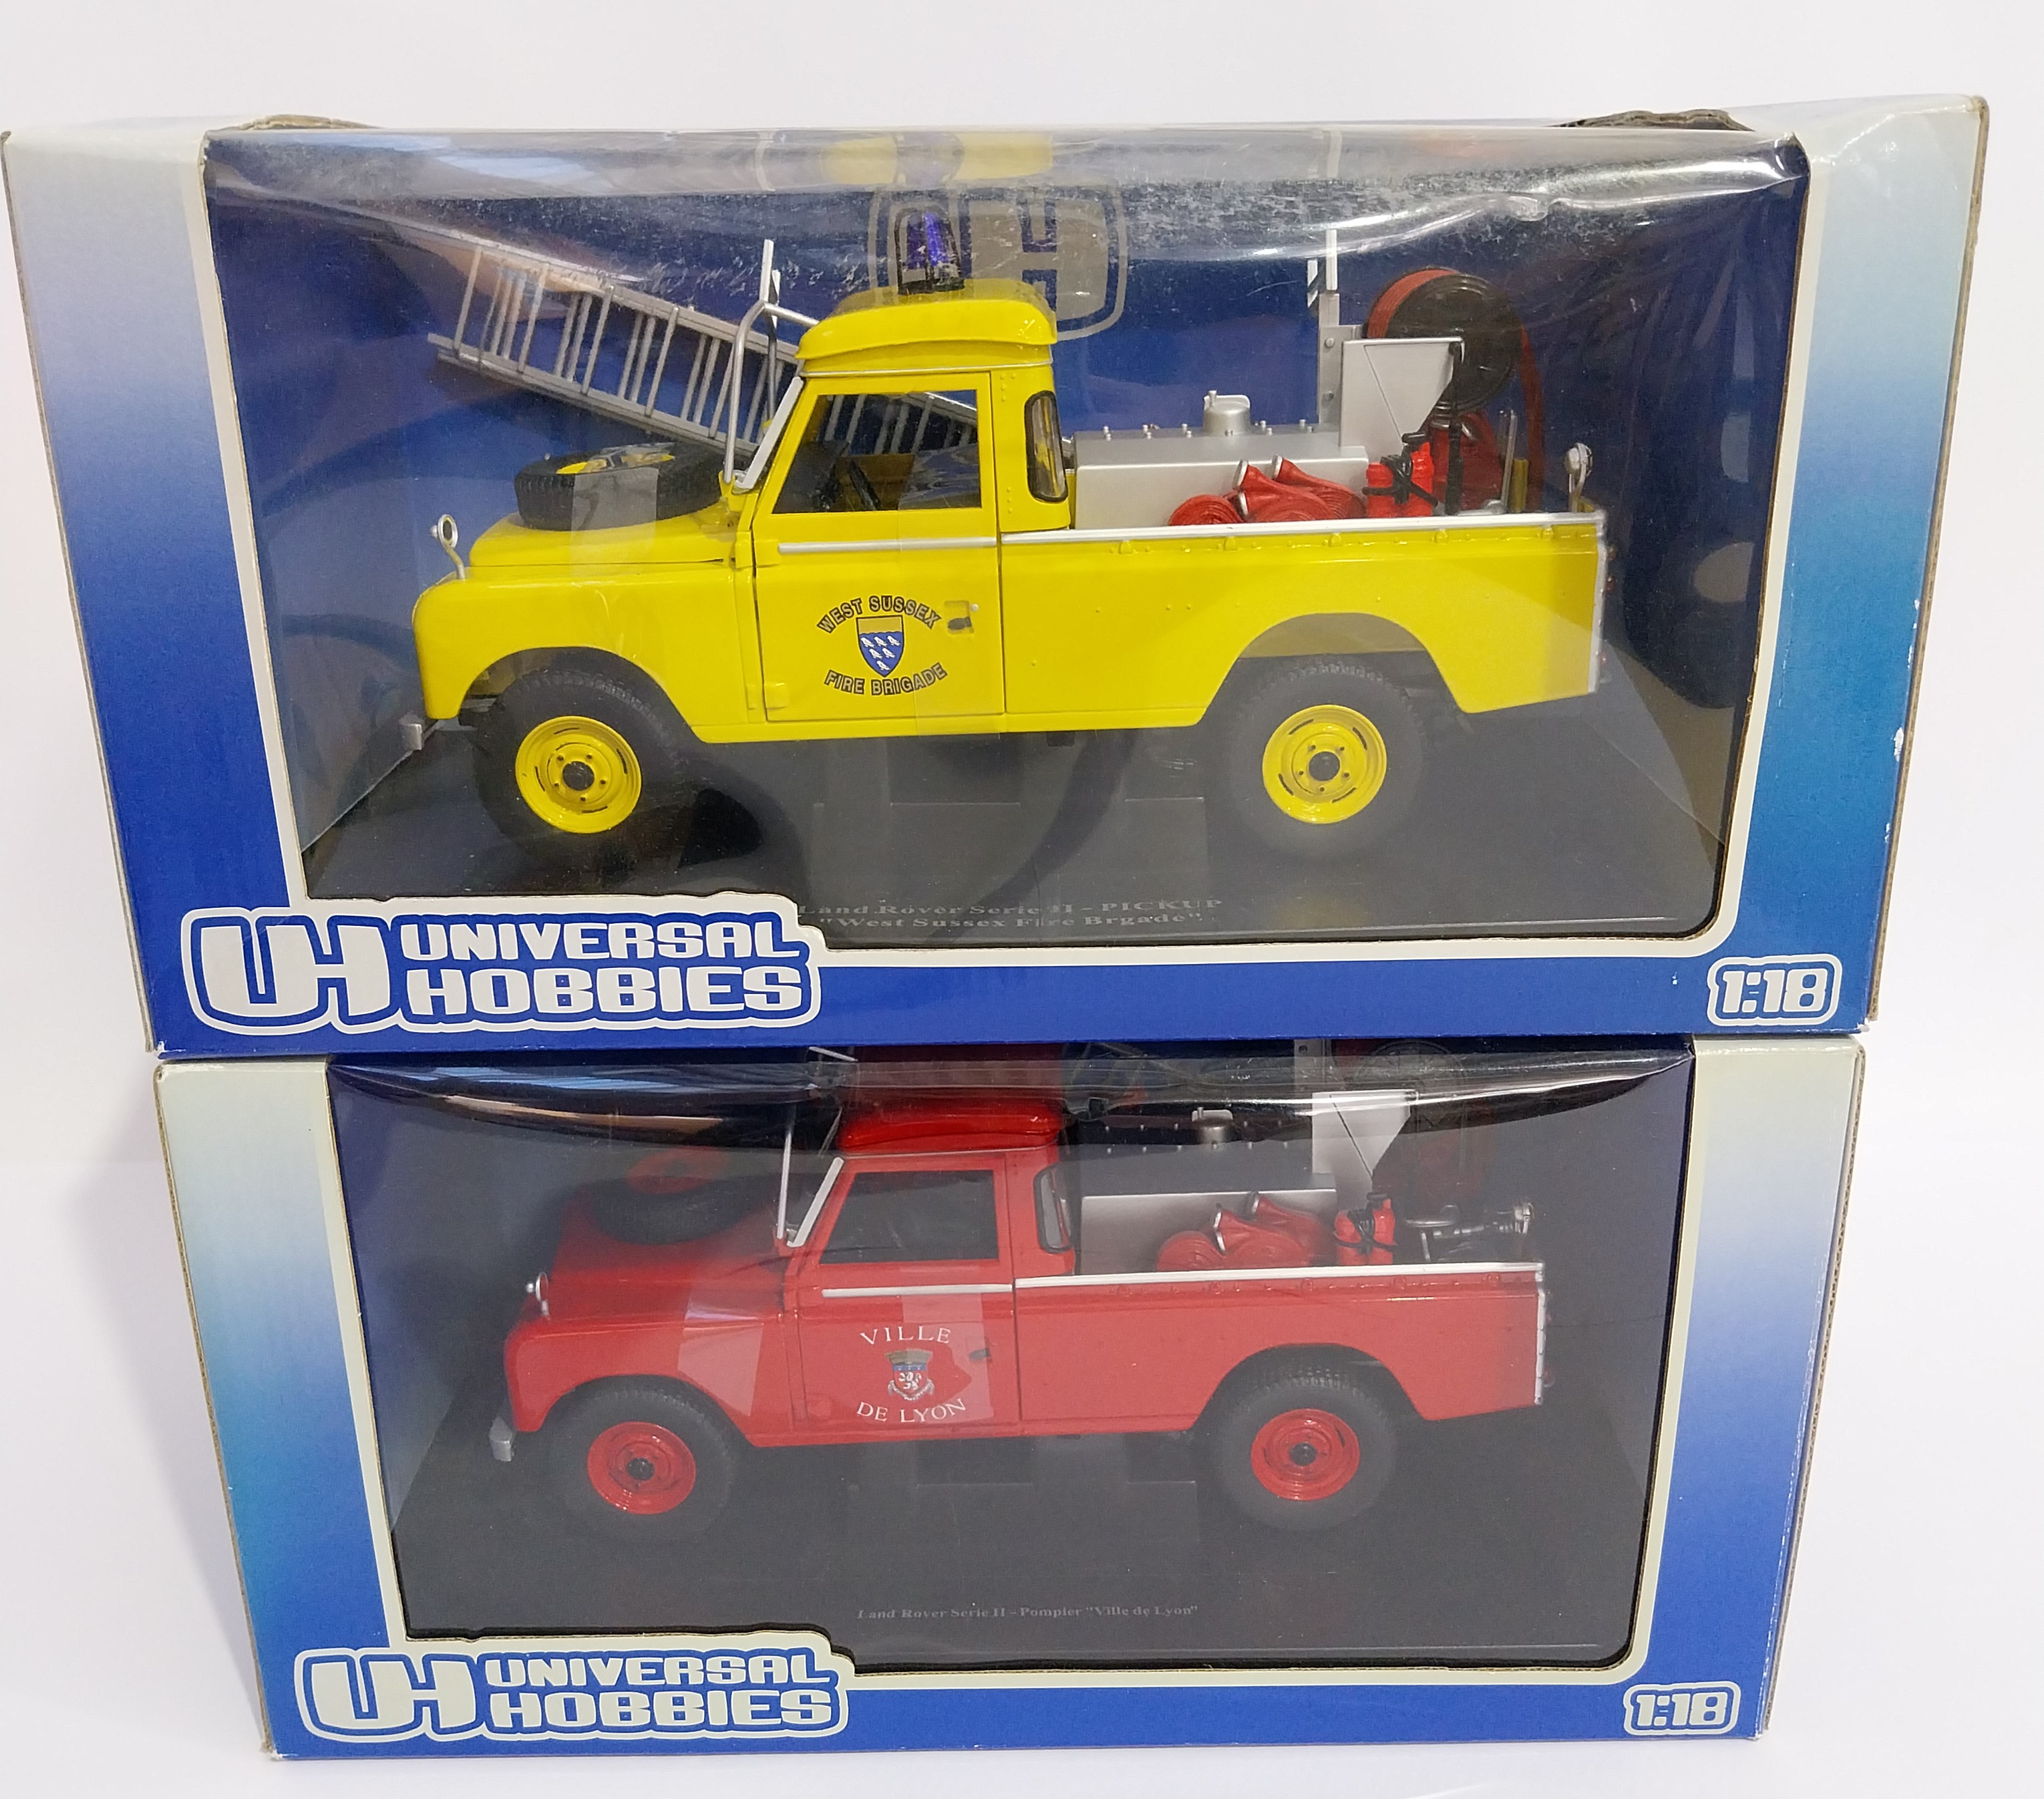 UH Universal Hobbies, a boxed pair of Landrover models